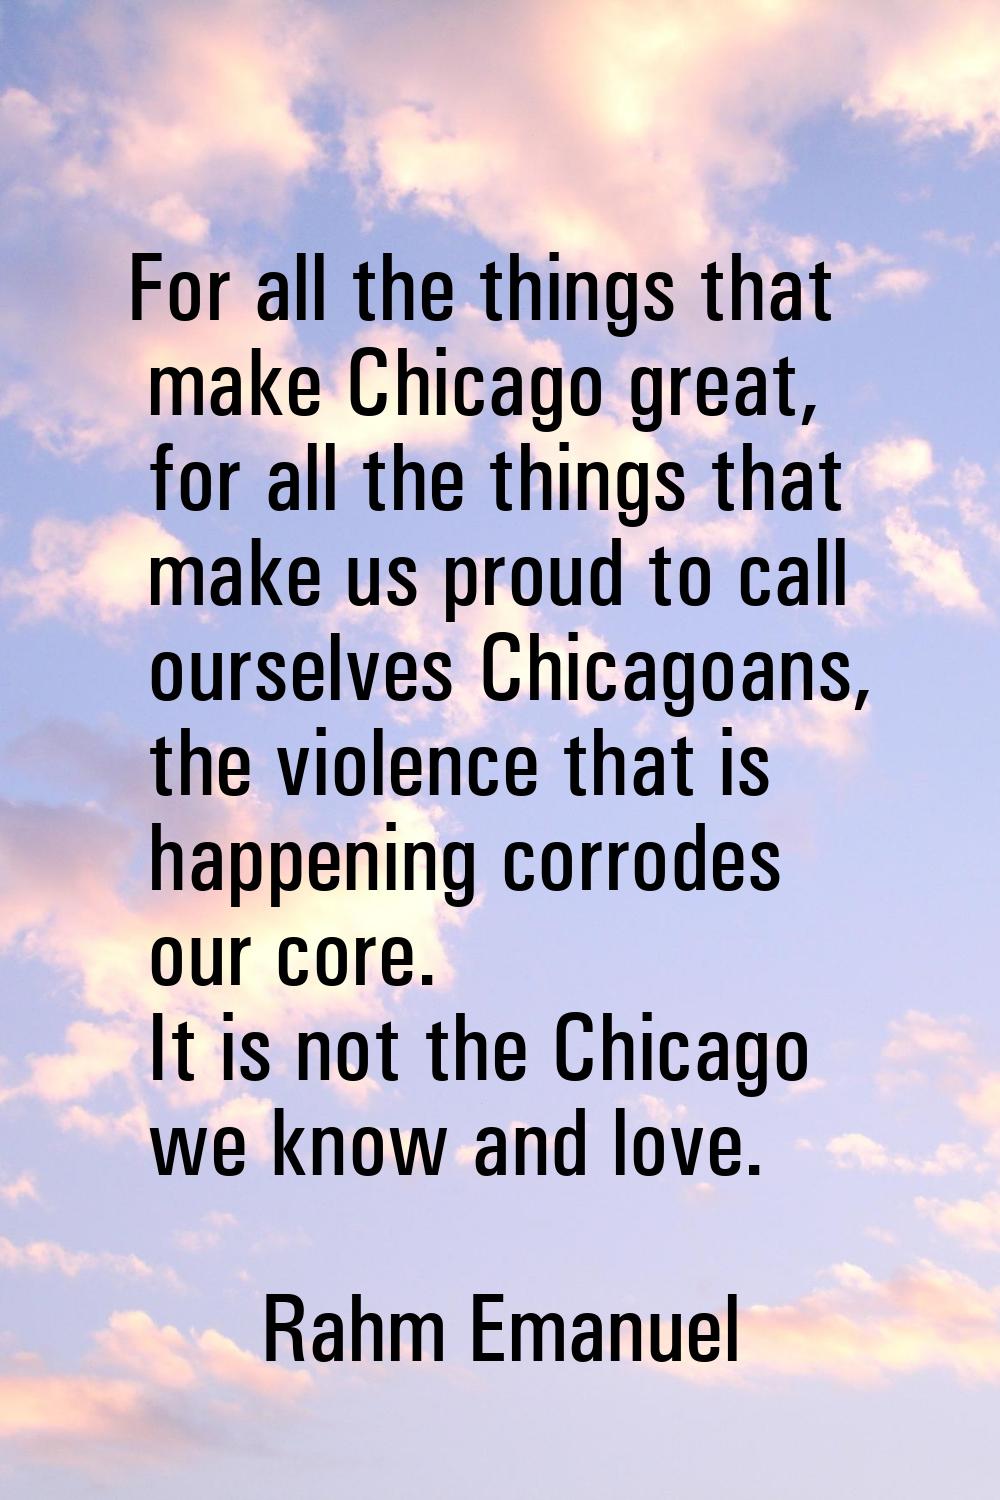 For all the things that make Chicago great, for all the things that make us proud to call ourselves